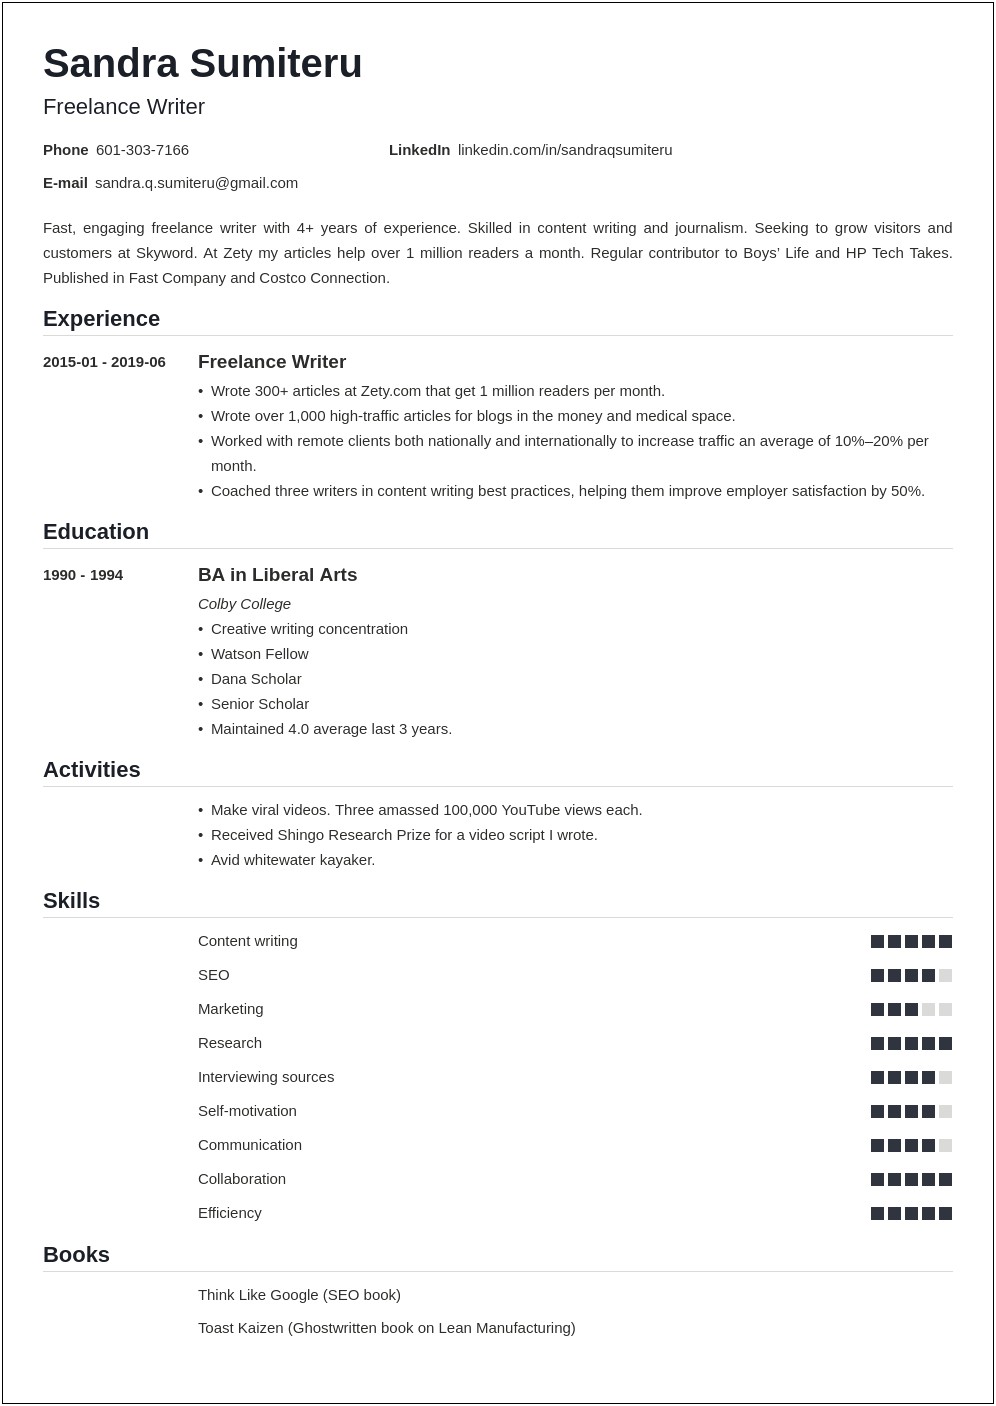 Sample Resume For Web Content Writer